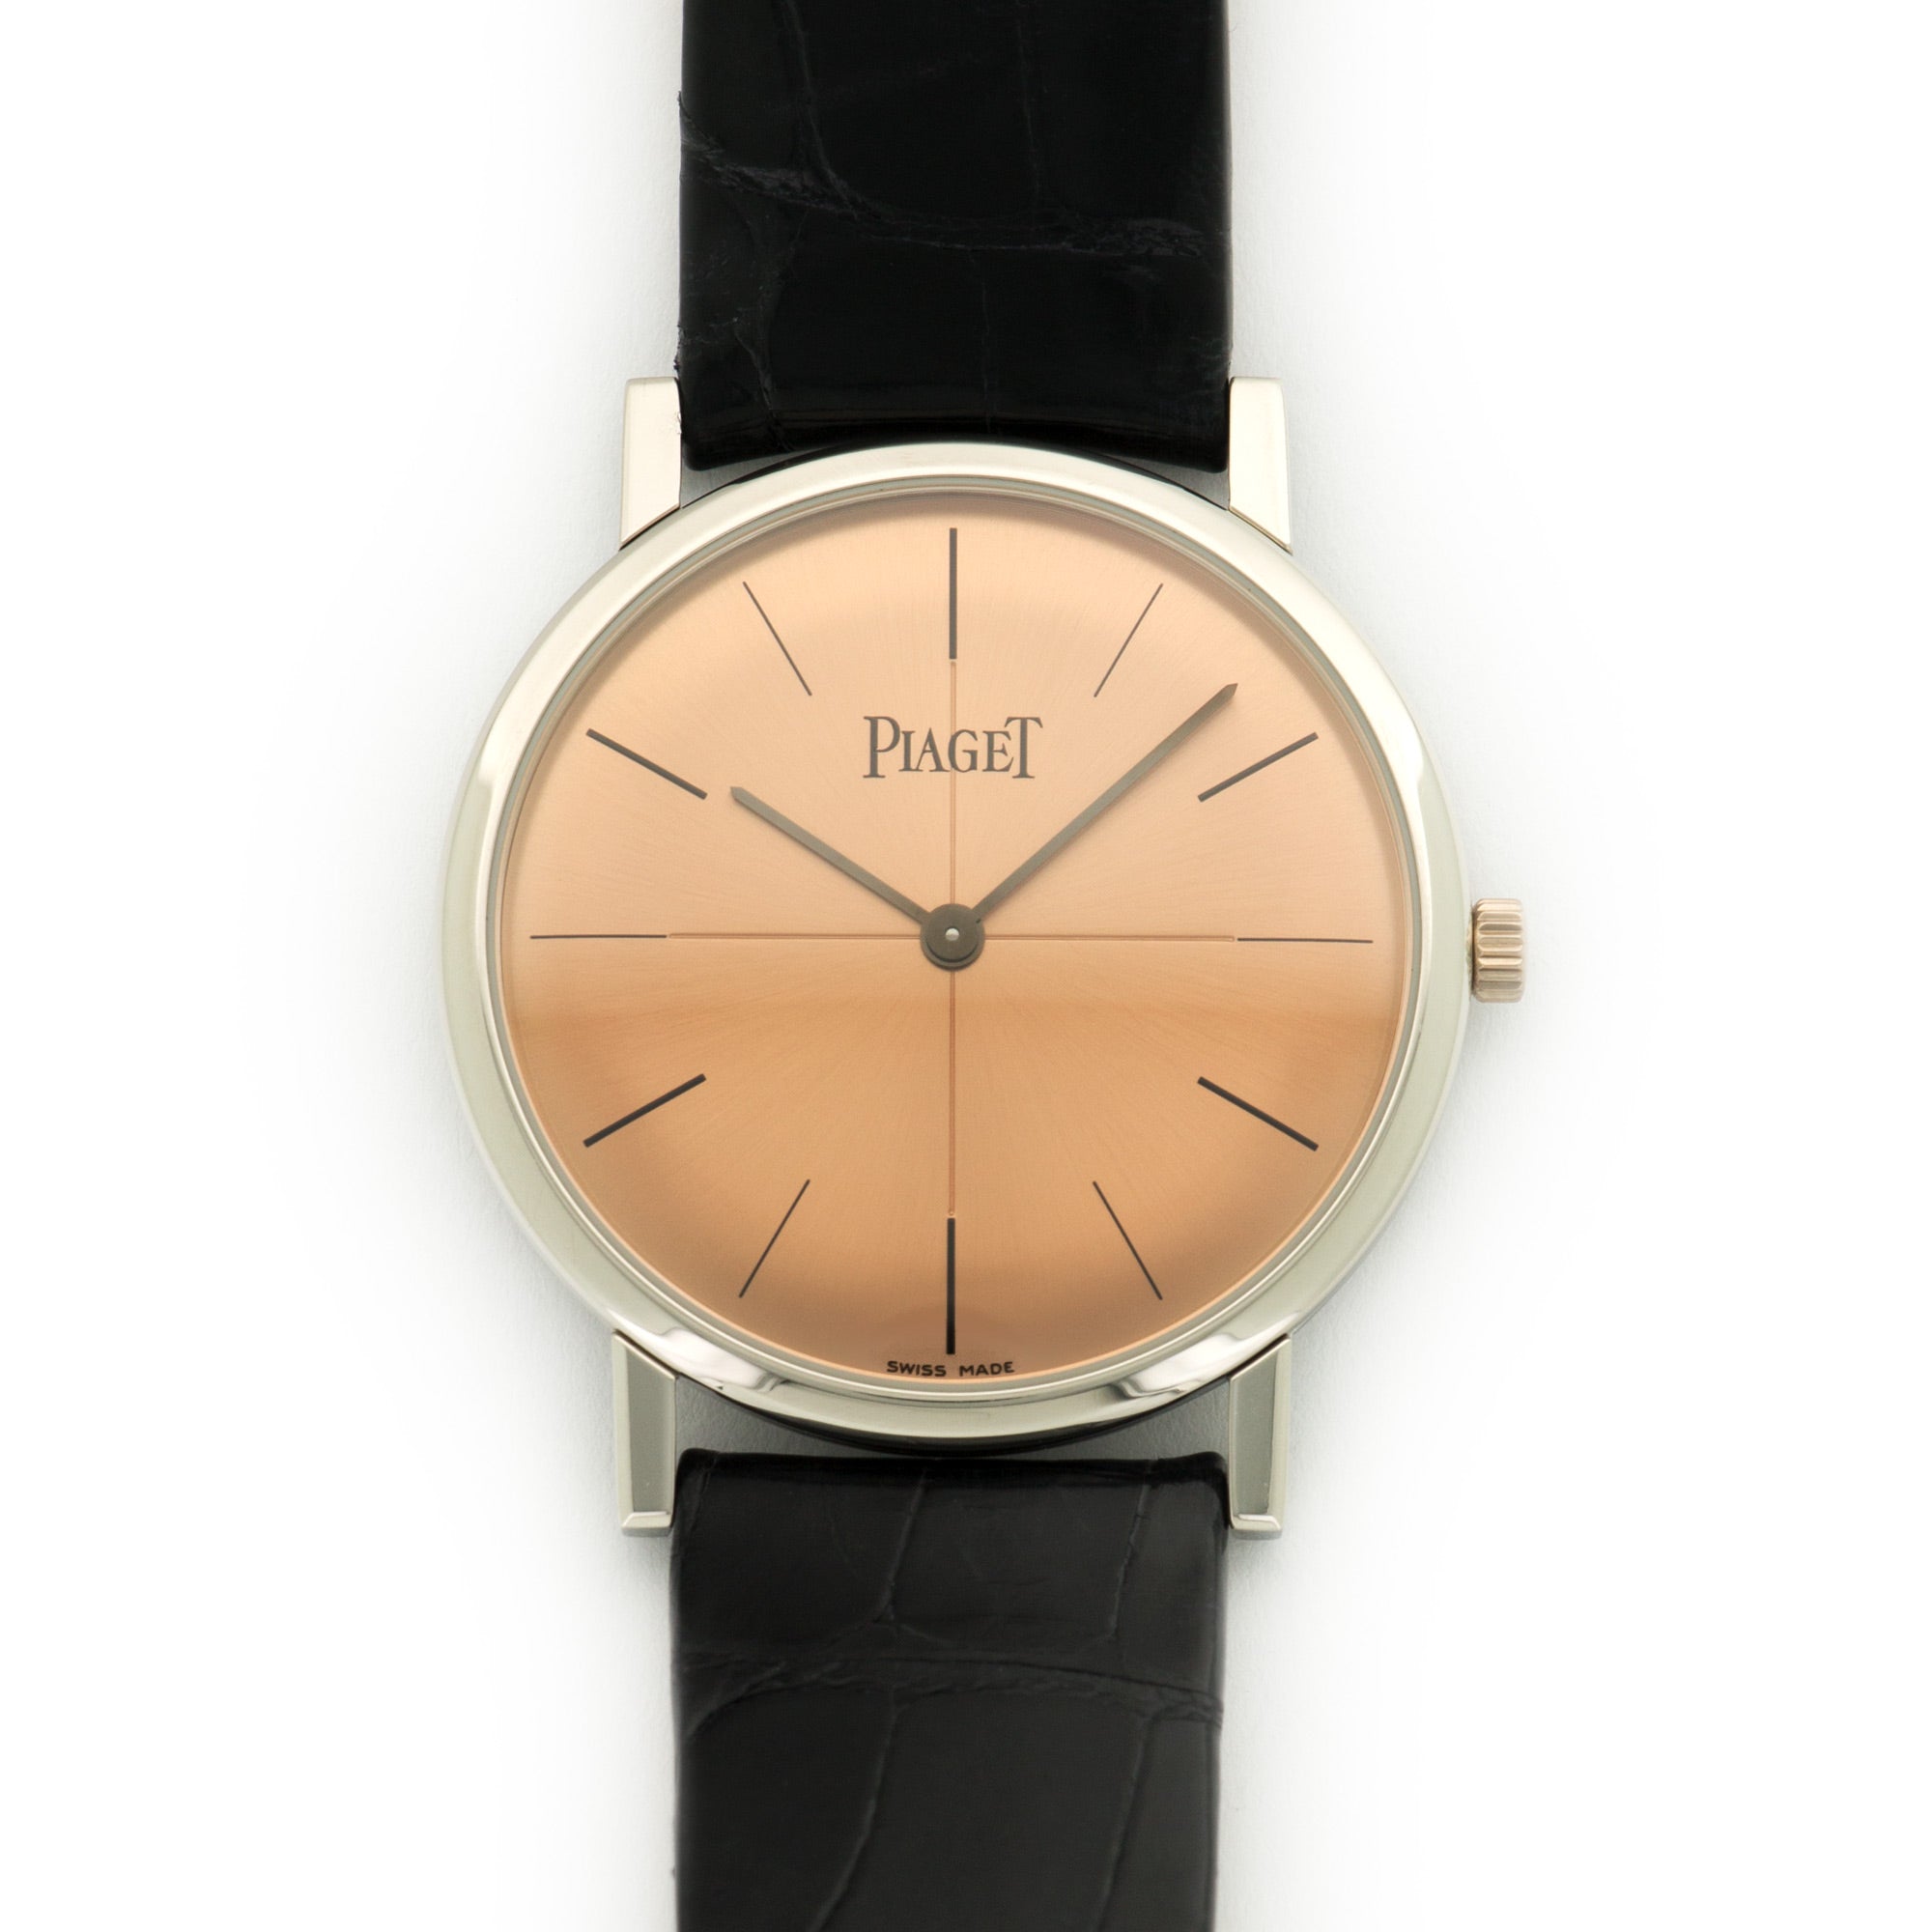 Piaget - Piaget Platinum Altiplano Ultra Thin Watch Ref. G0A27009 - The Keystone Watches